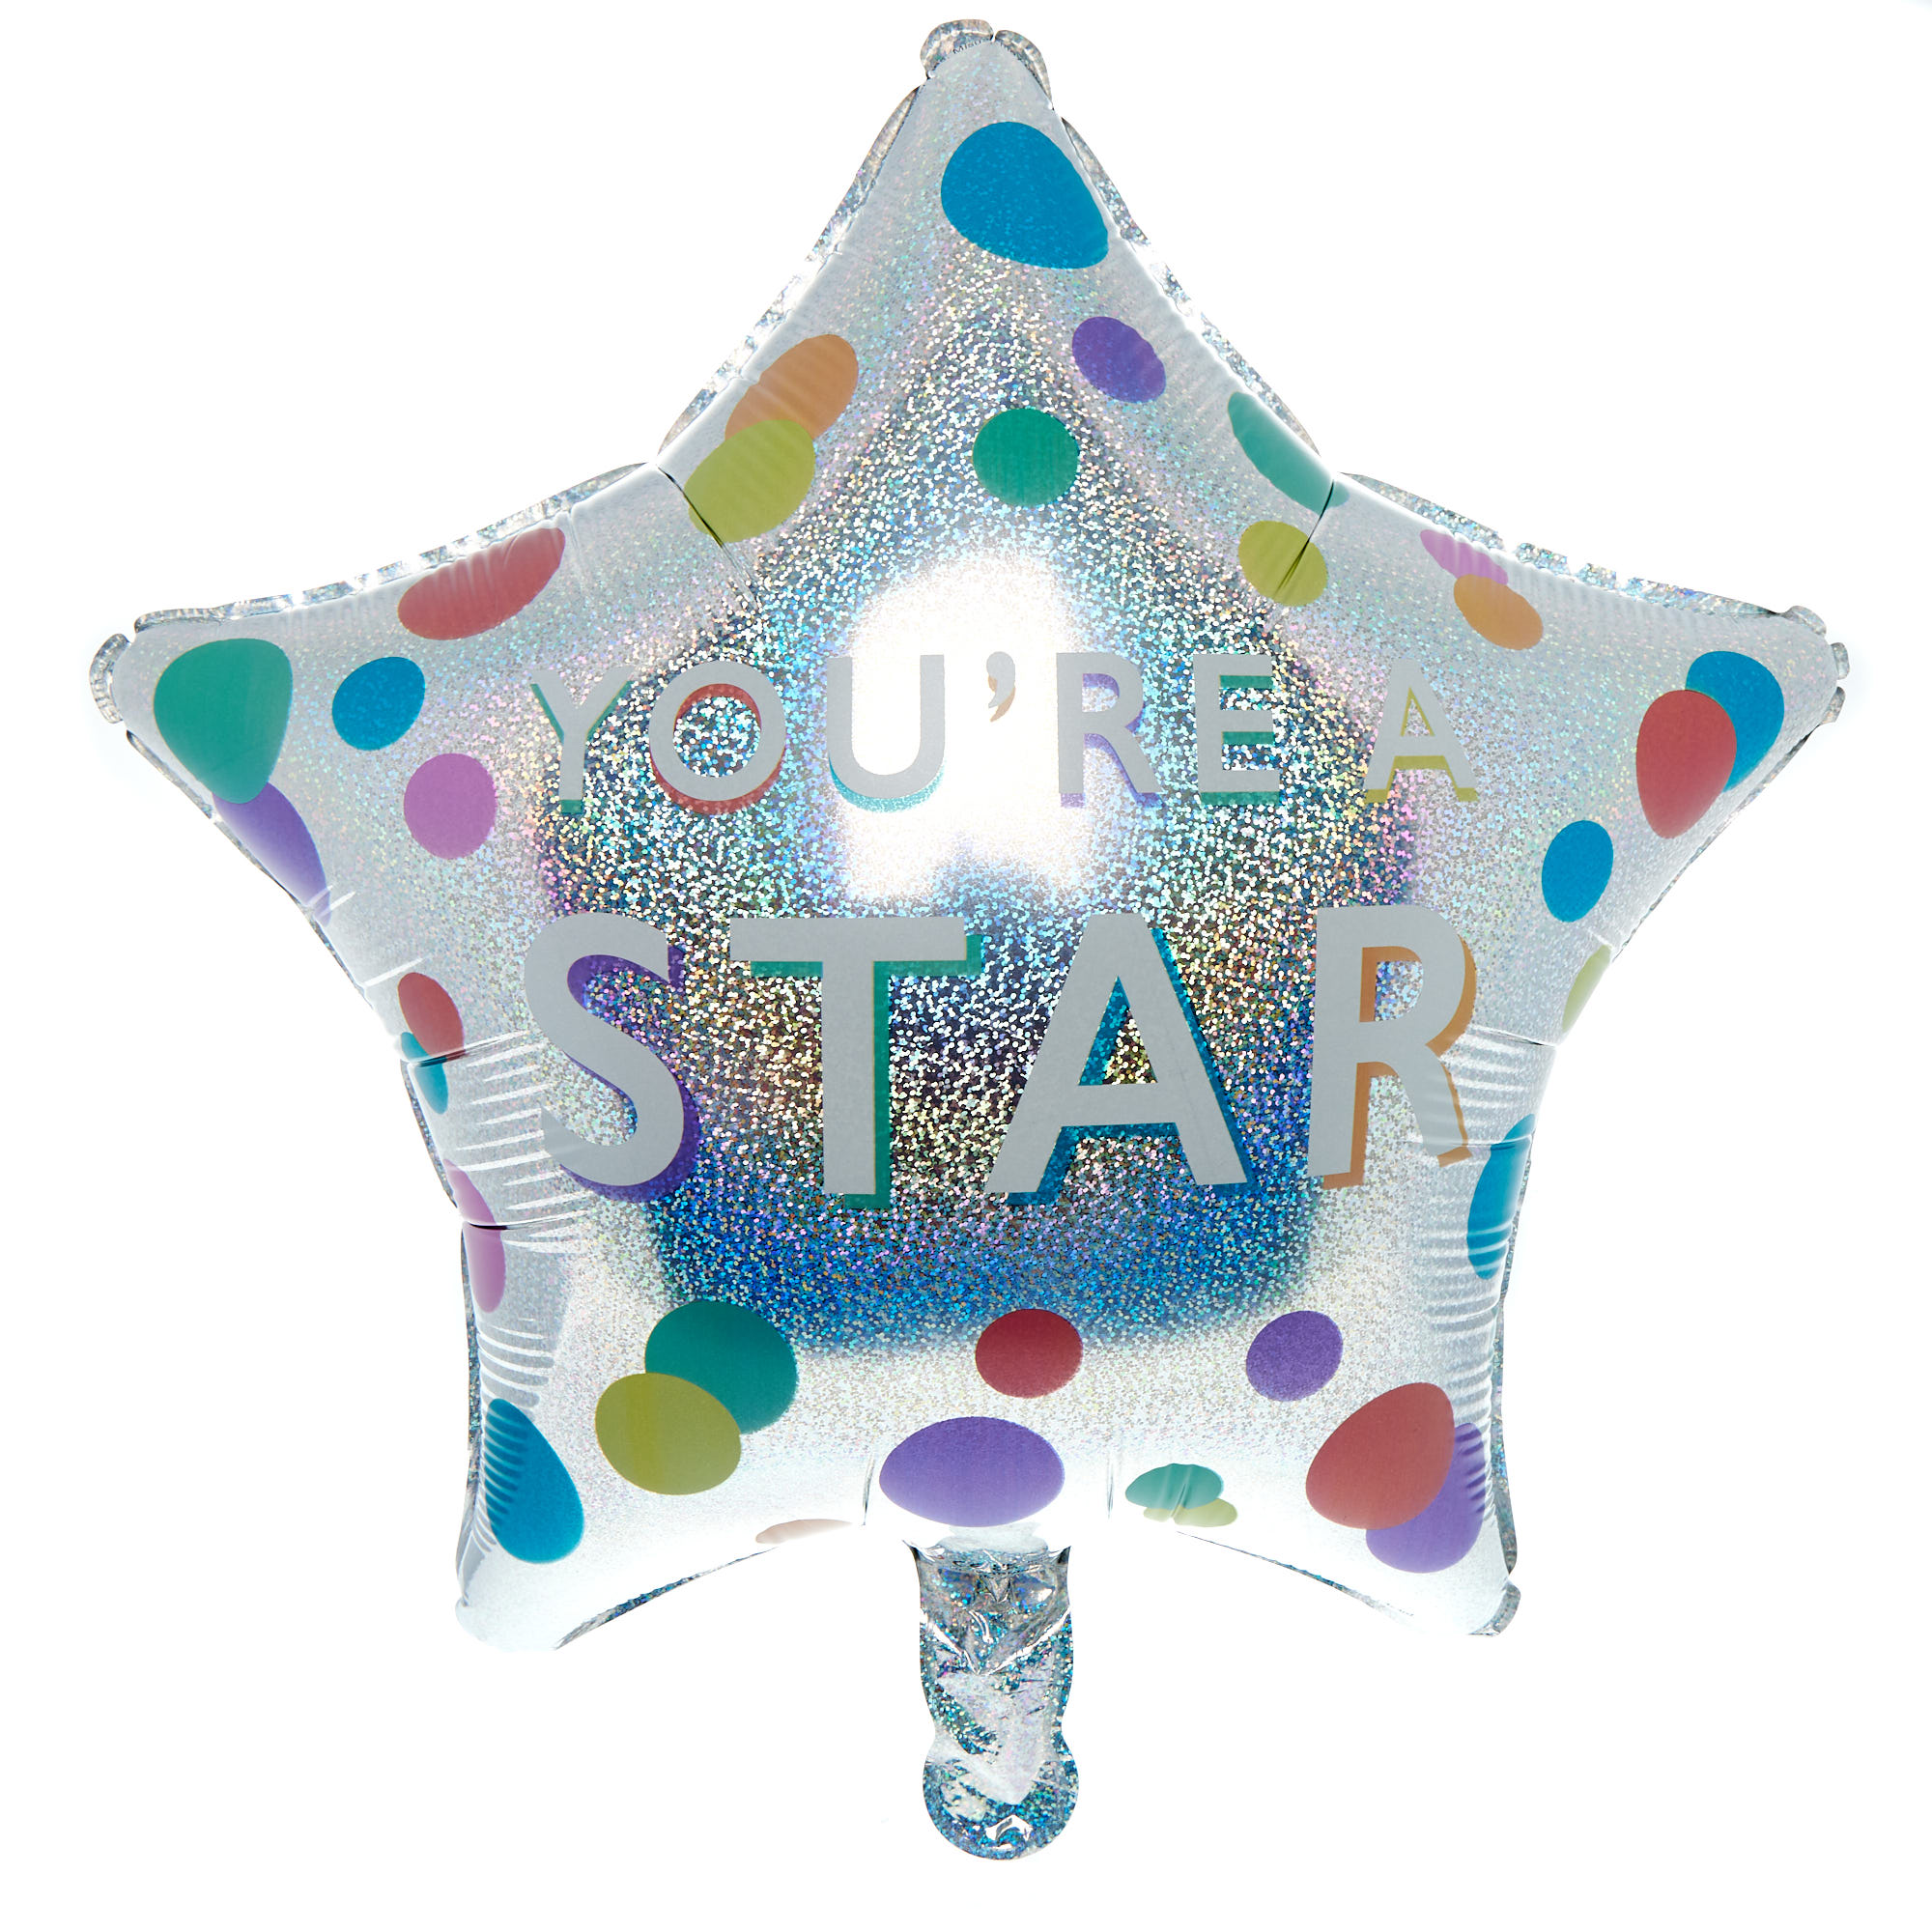 You're A Star Balloon Bouquet - DELIVERED INFLATED!